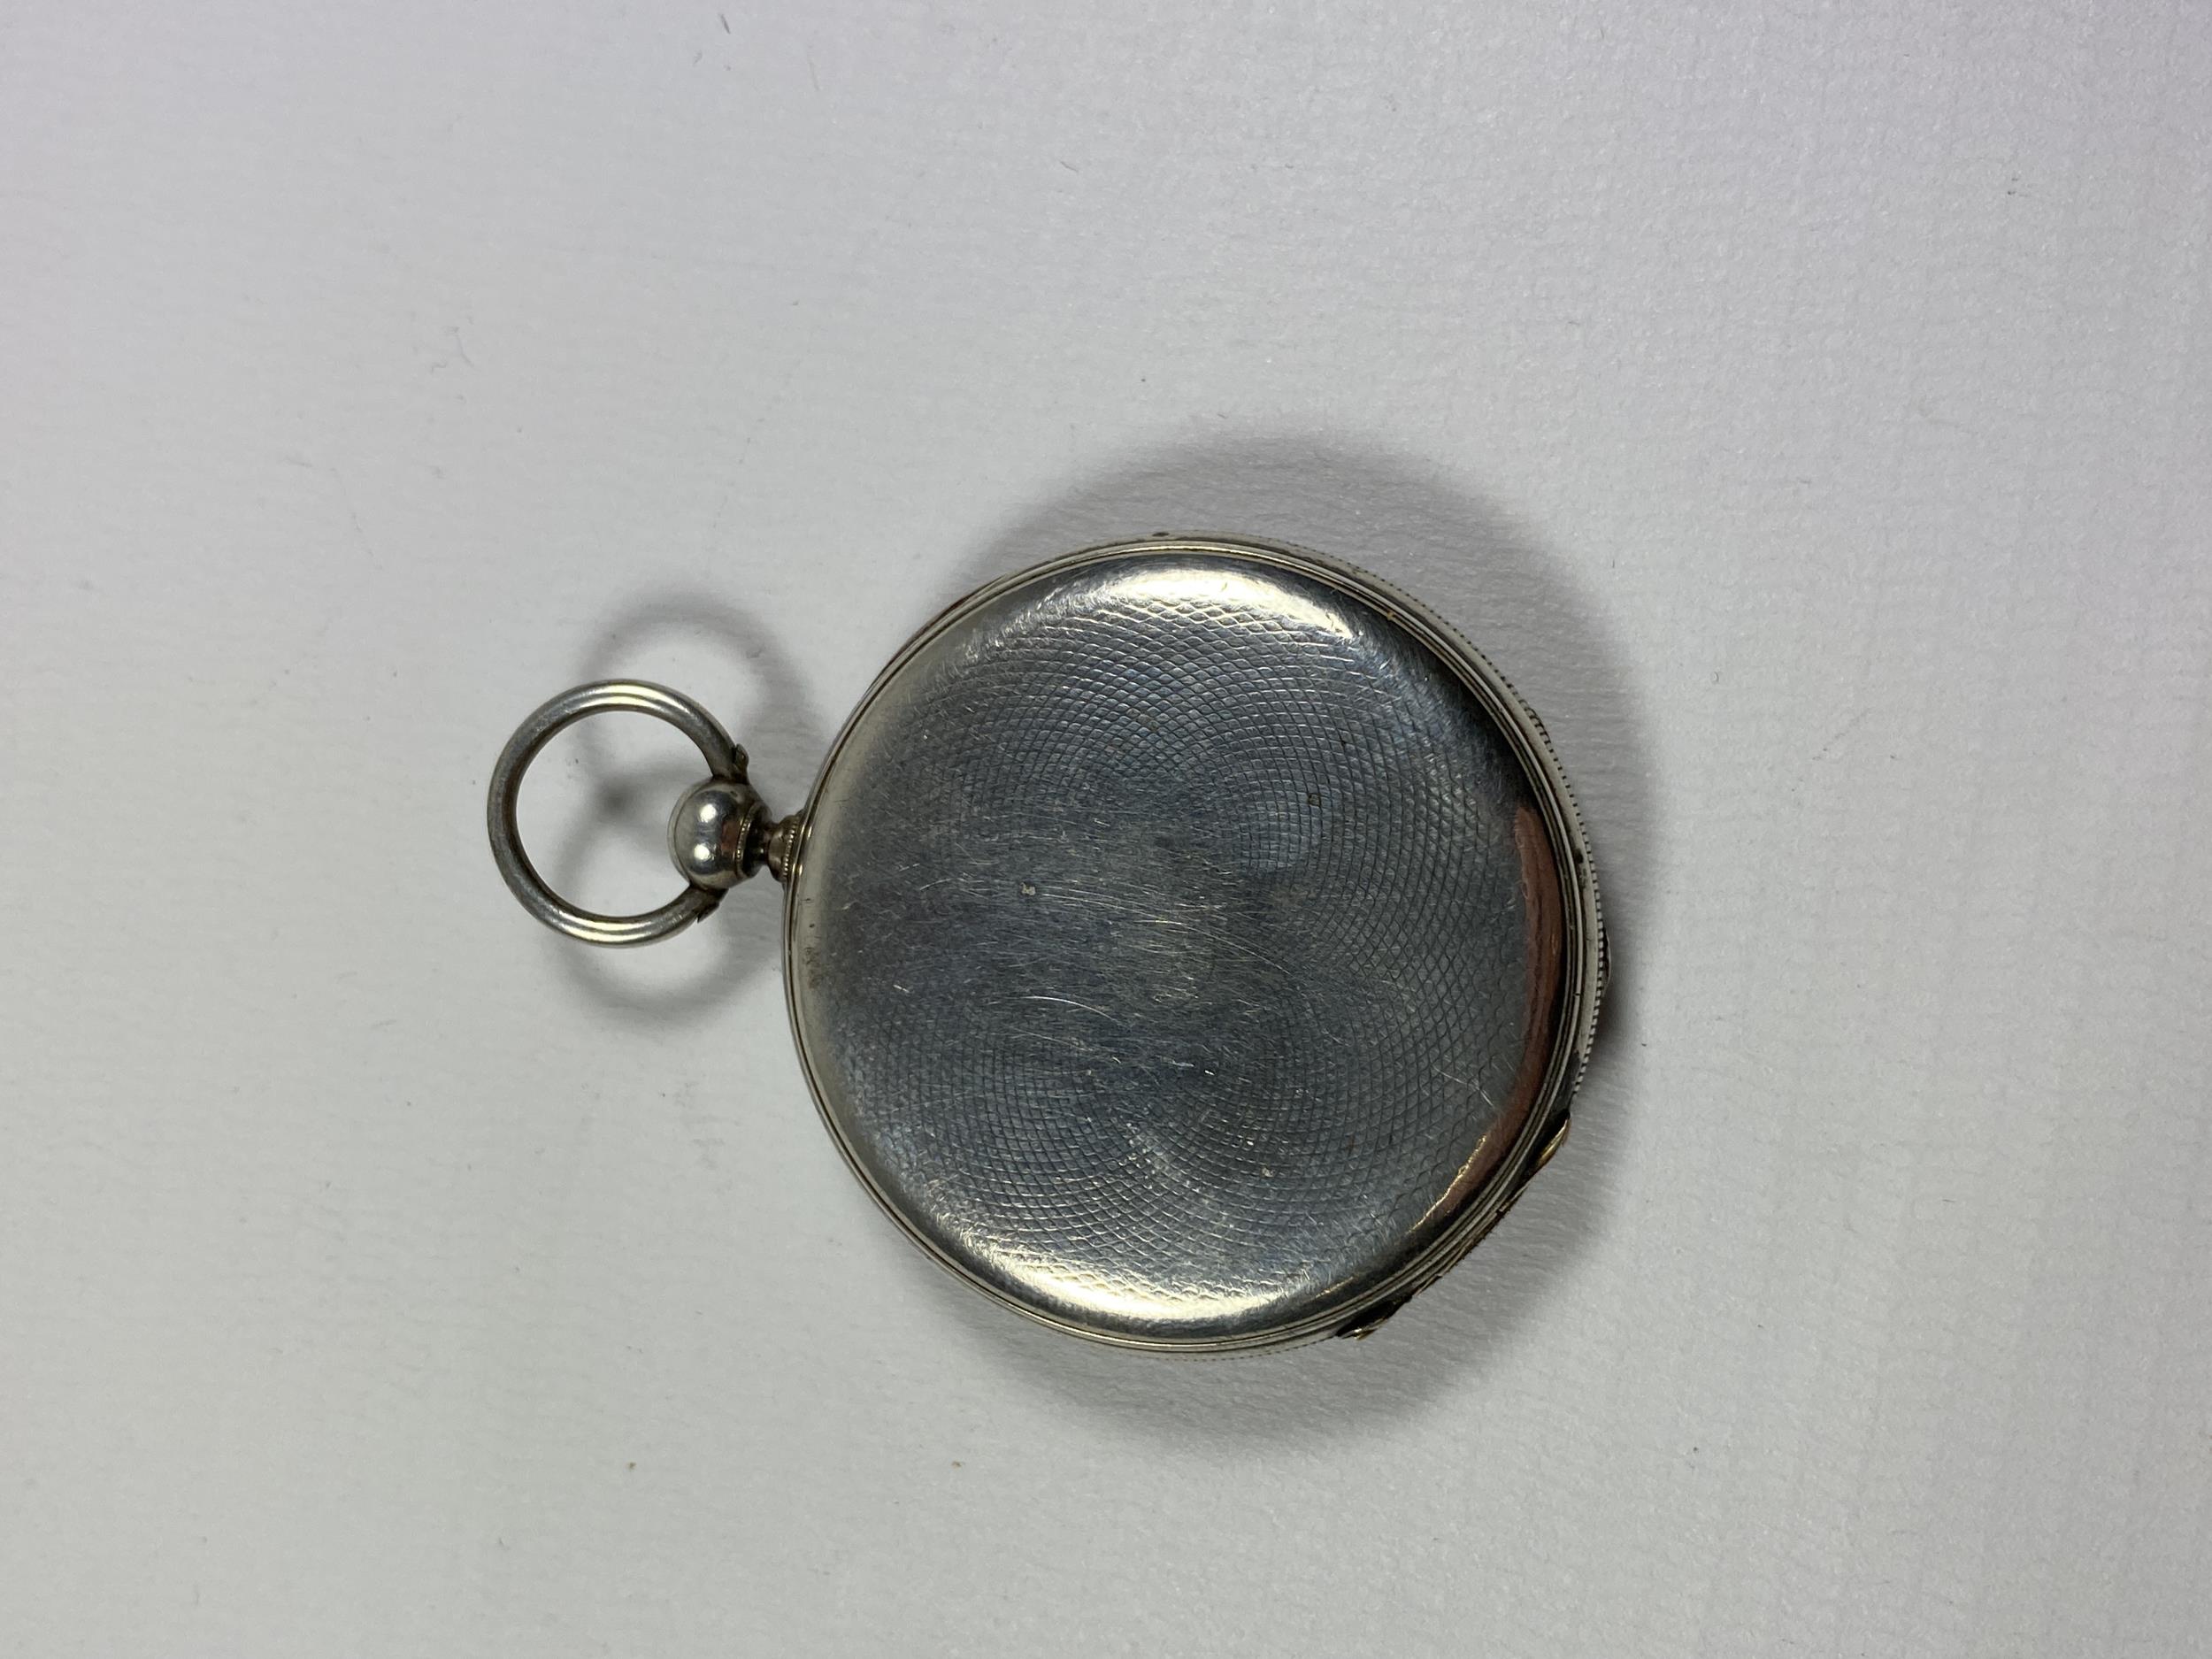 A C.DEFOND OPEN FACED POCKET WATCH - Image 2 of 3